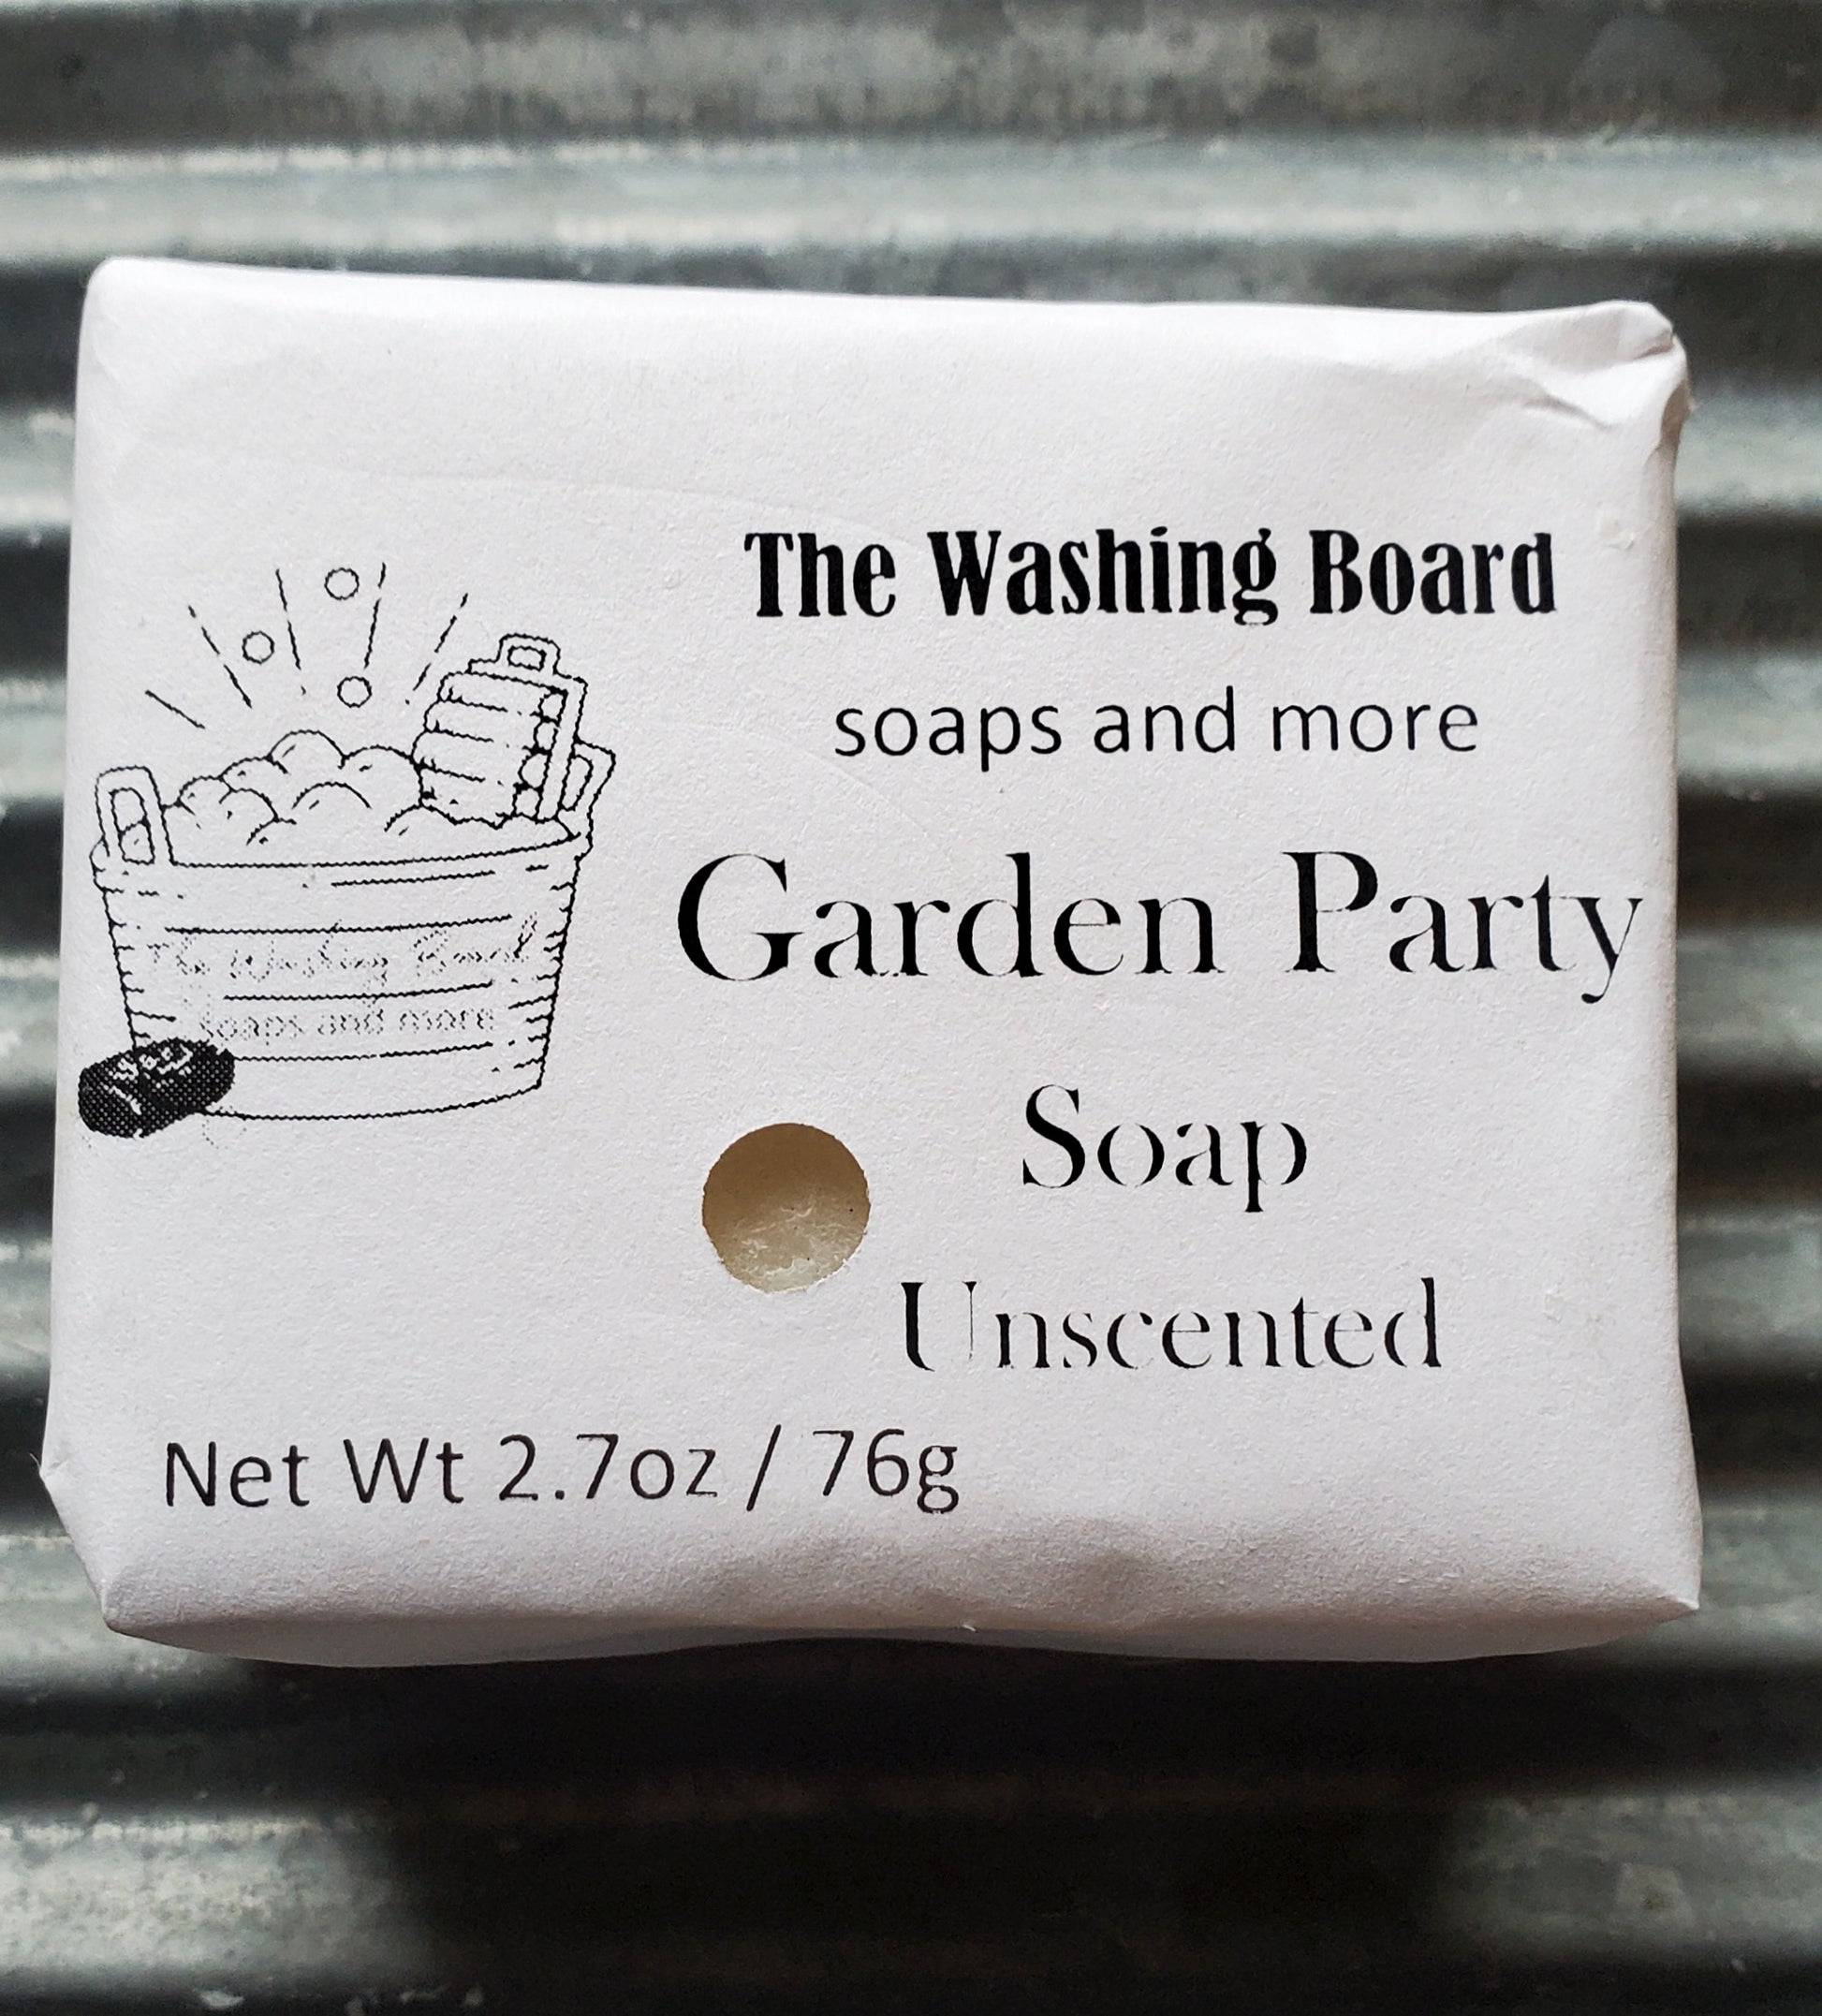 Garden Party bar shown in eco friendly packaging on a washboard. 